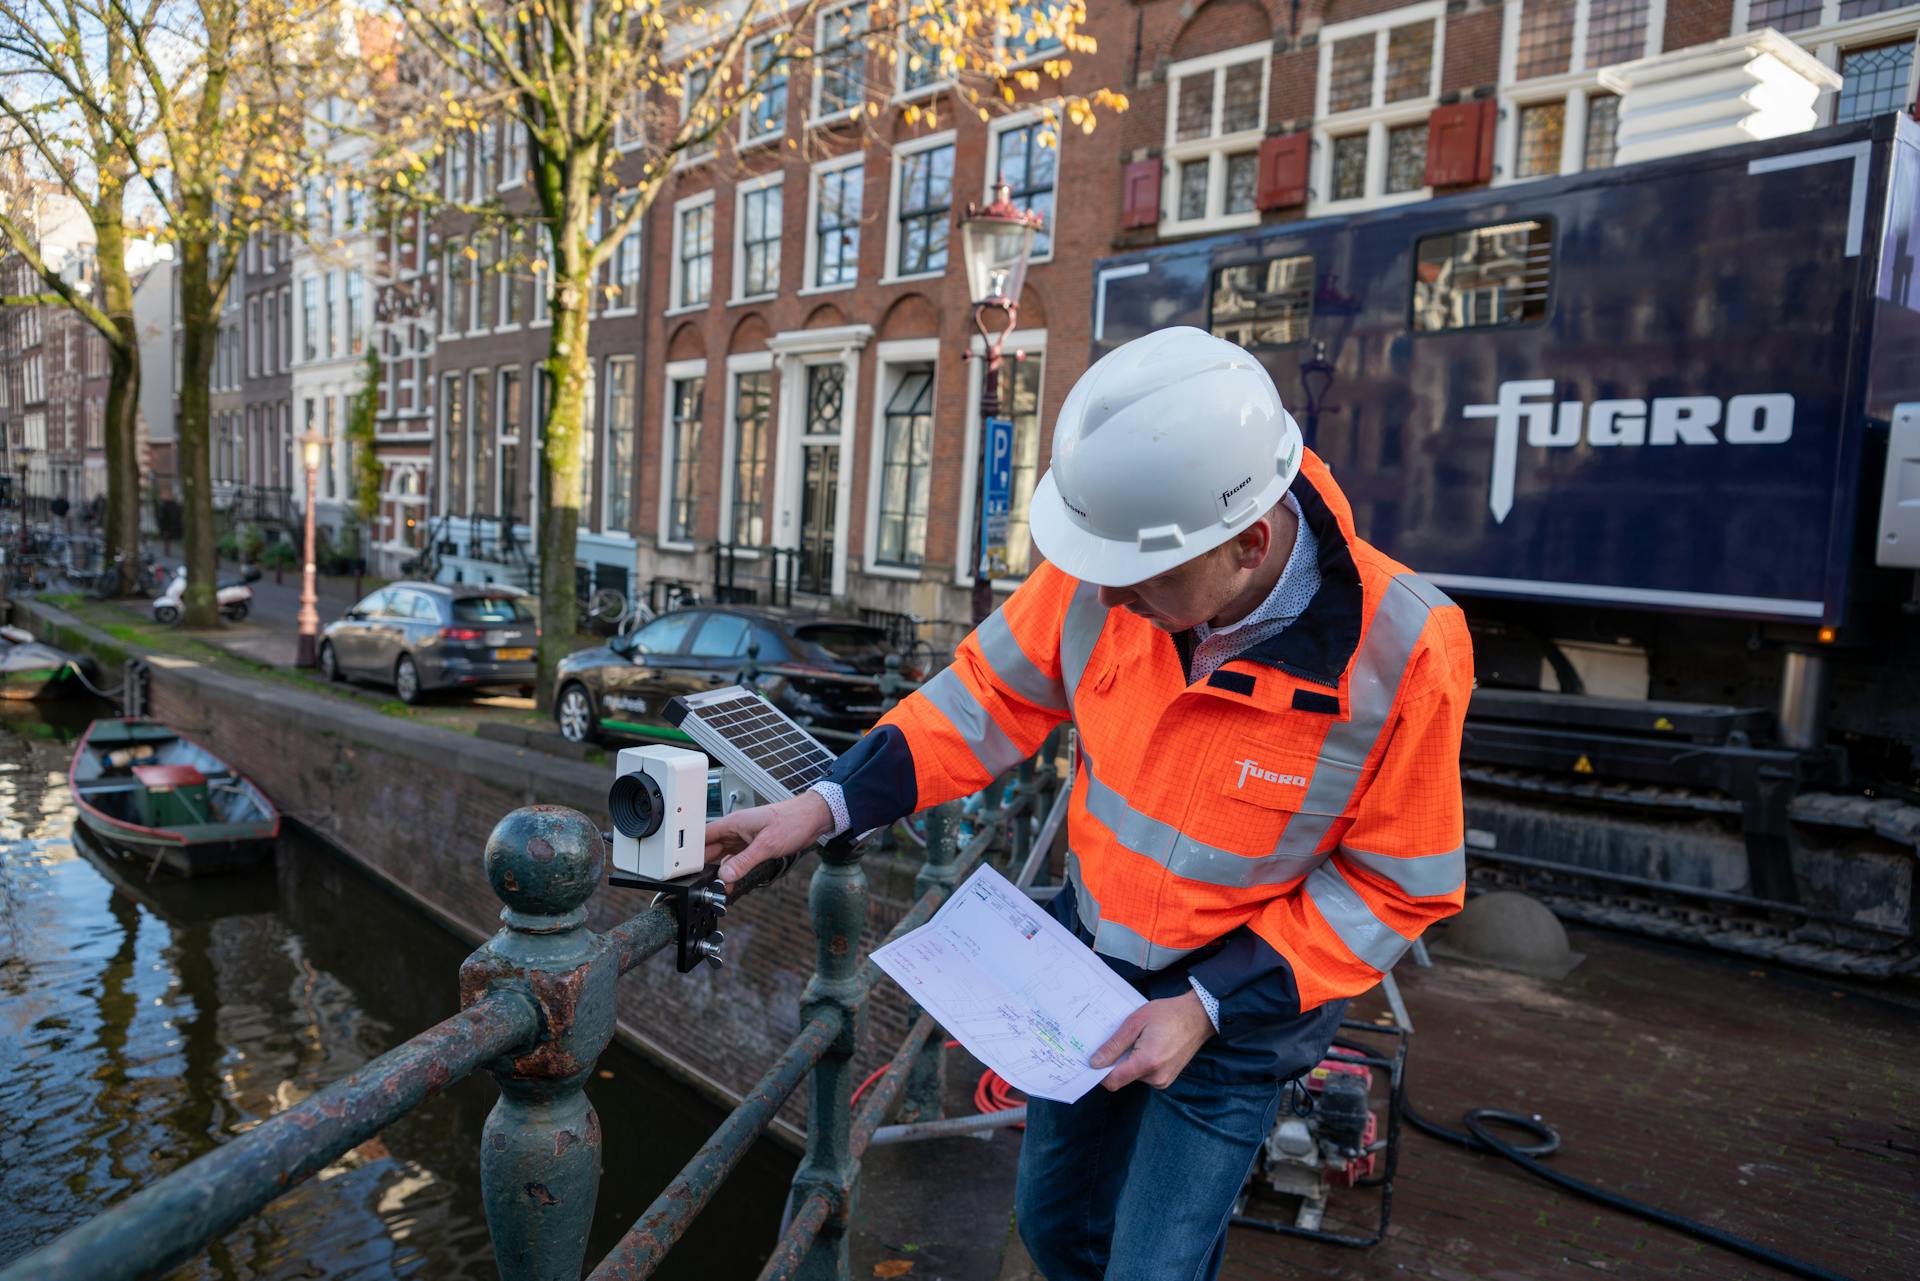 Site investigation (CPT and drilling) and monitoring
Performing CPT, drilling and monitoring of the Grimburgwal canal in Amsterdam